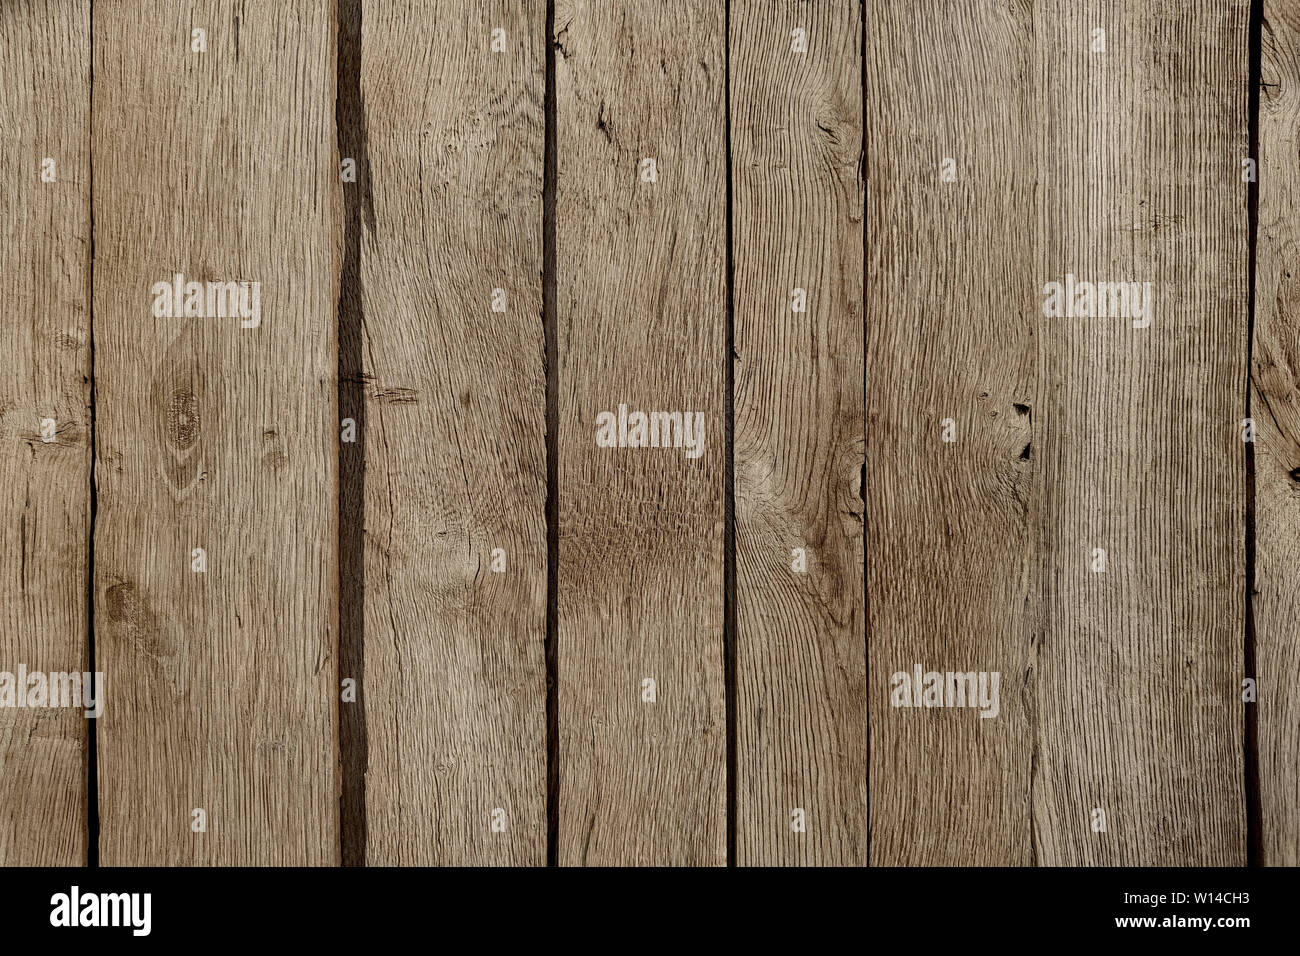 grunge wooden texture to use as background, wood texture with natural pattern Stock Photo